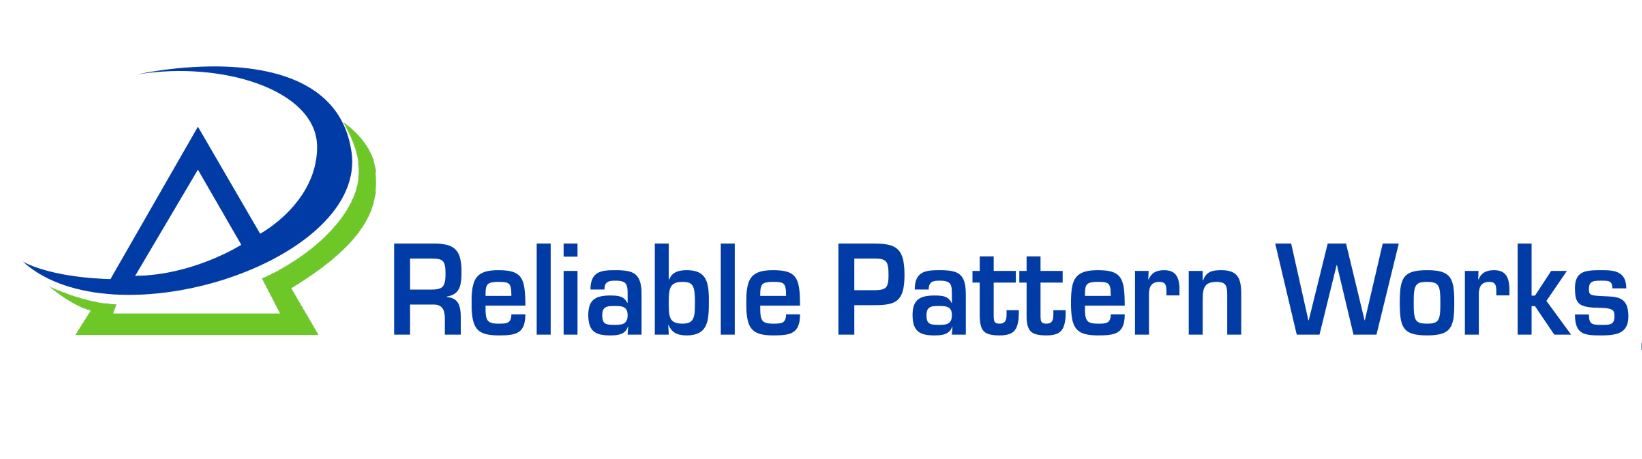 Reliable Pattern Works, Inc.